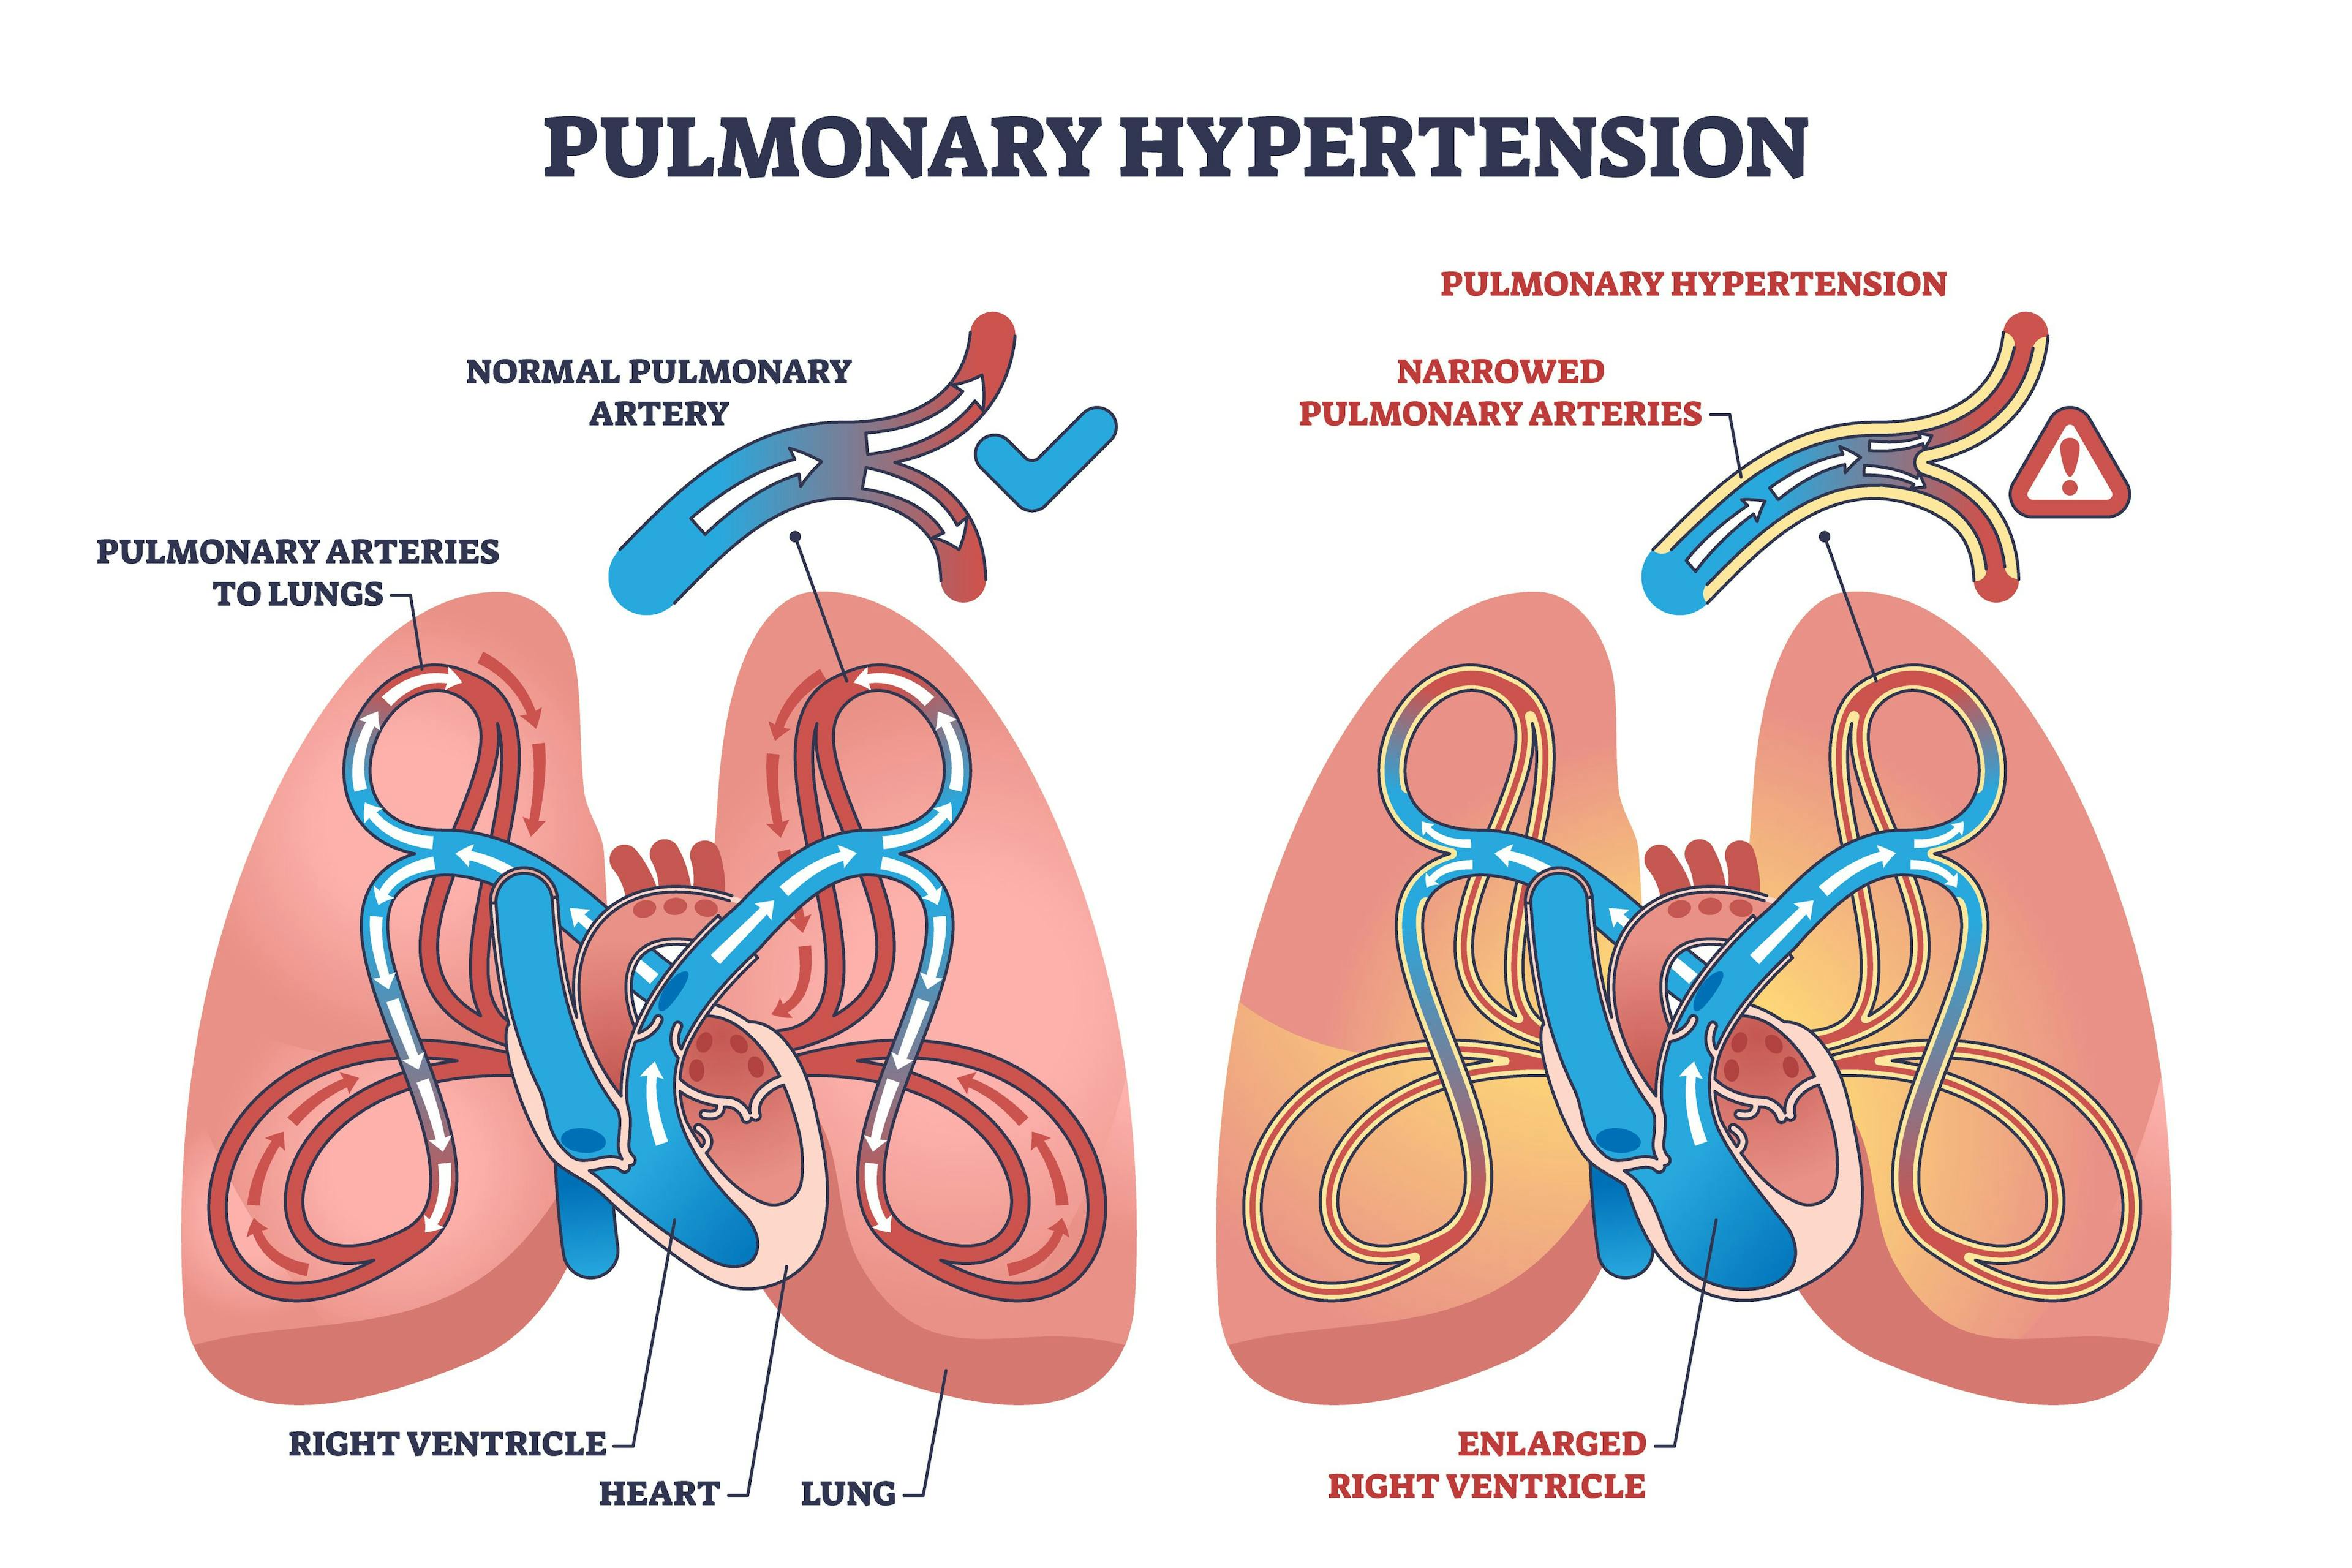 FDA Approves Combination Therapy for Pulmonary Arterial Hypertension